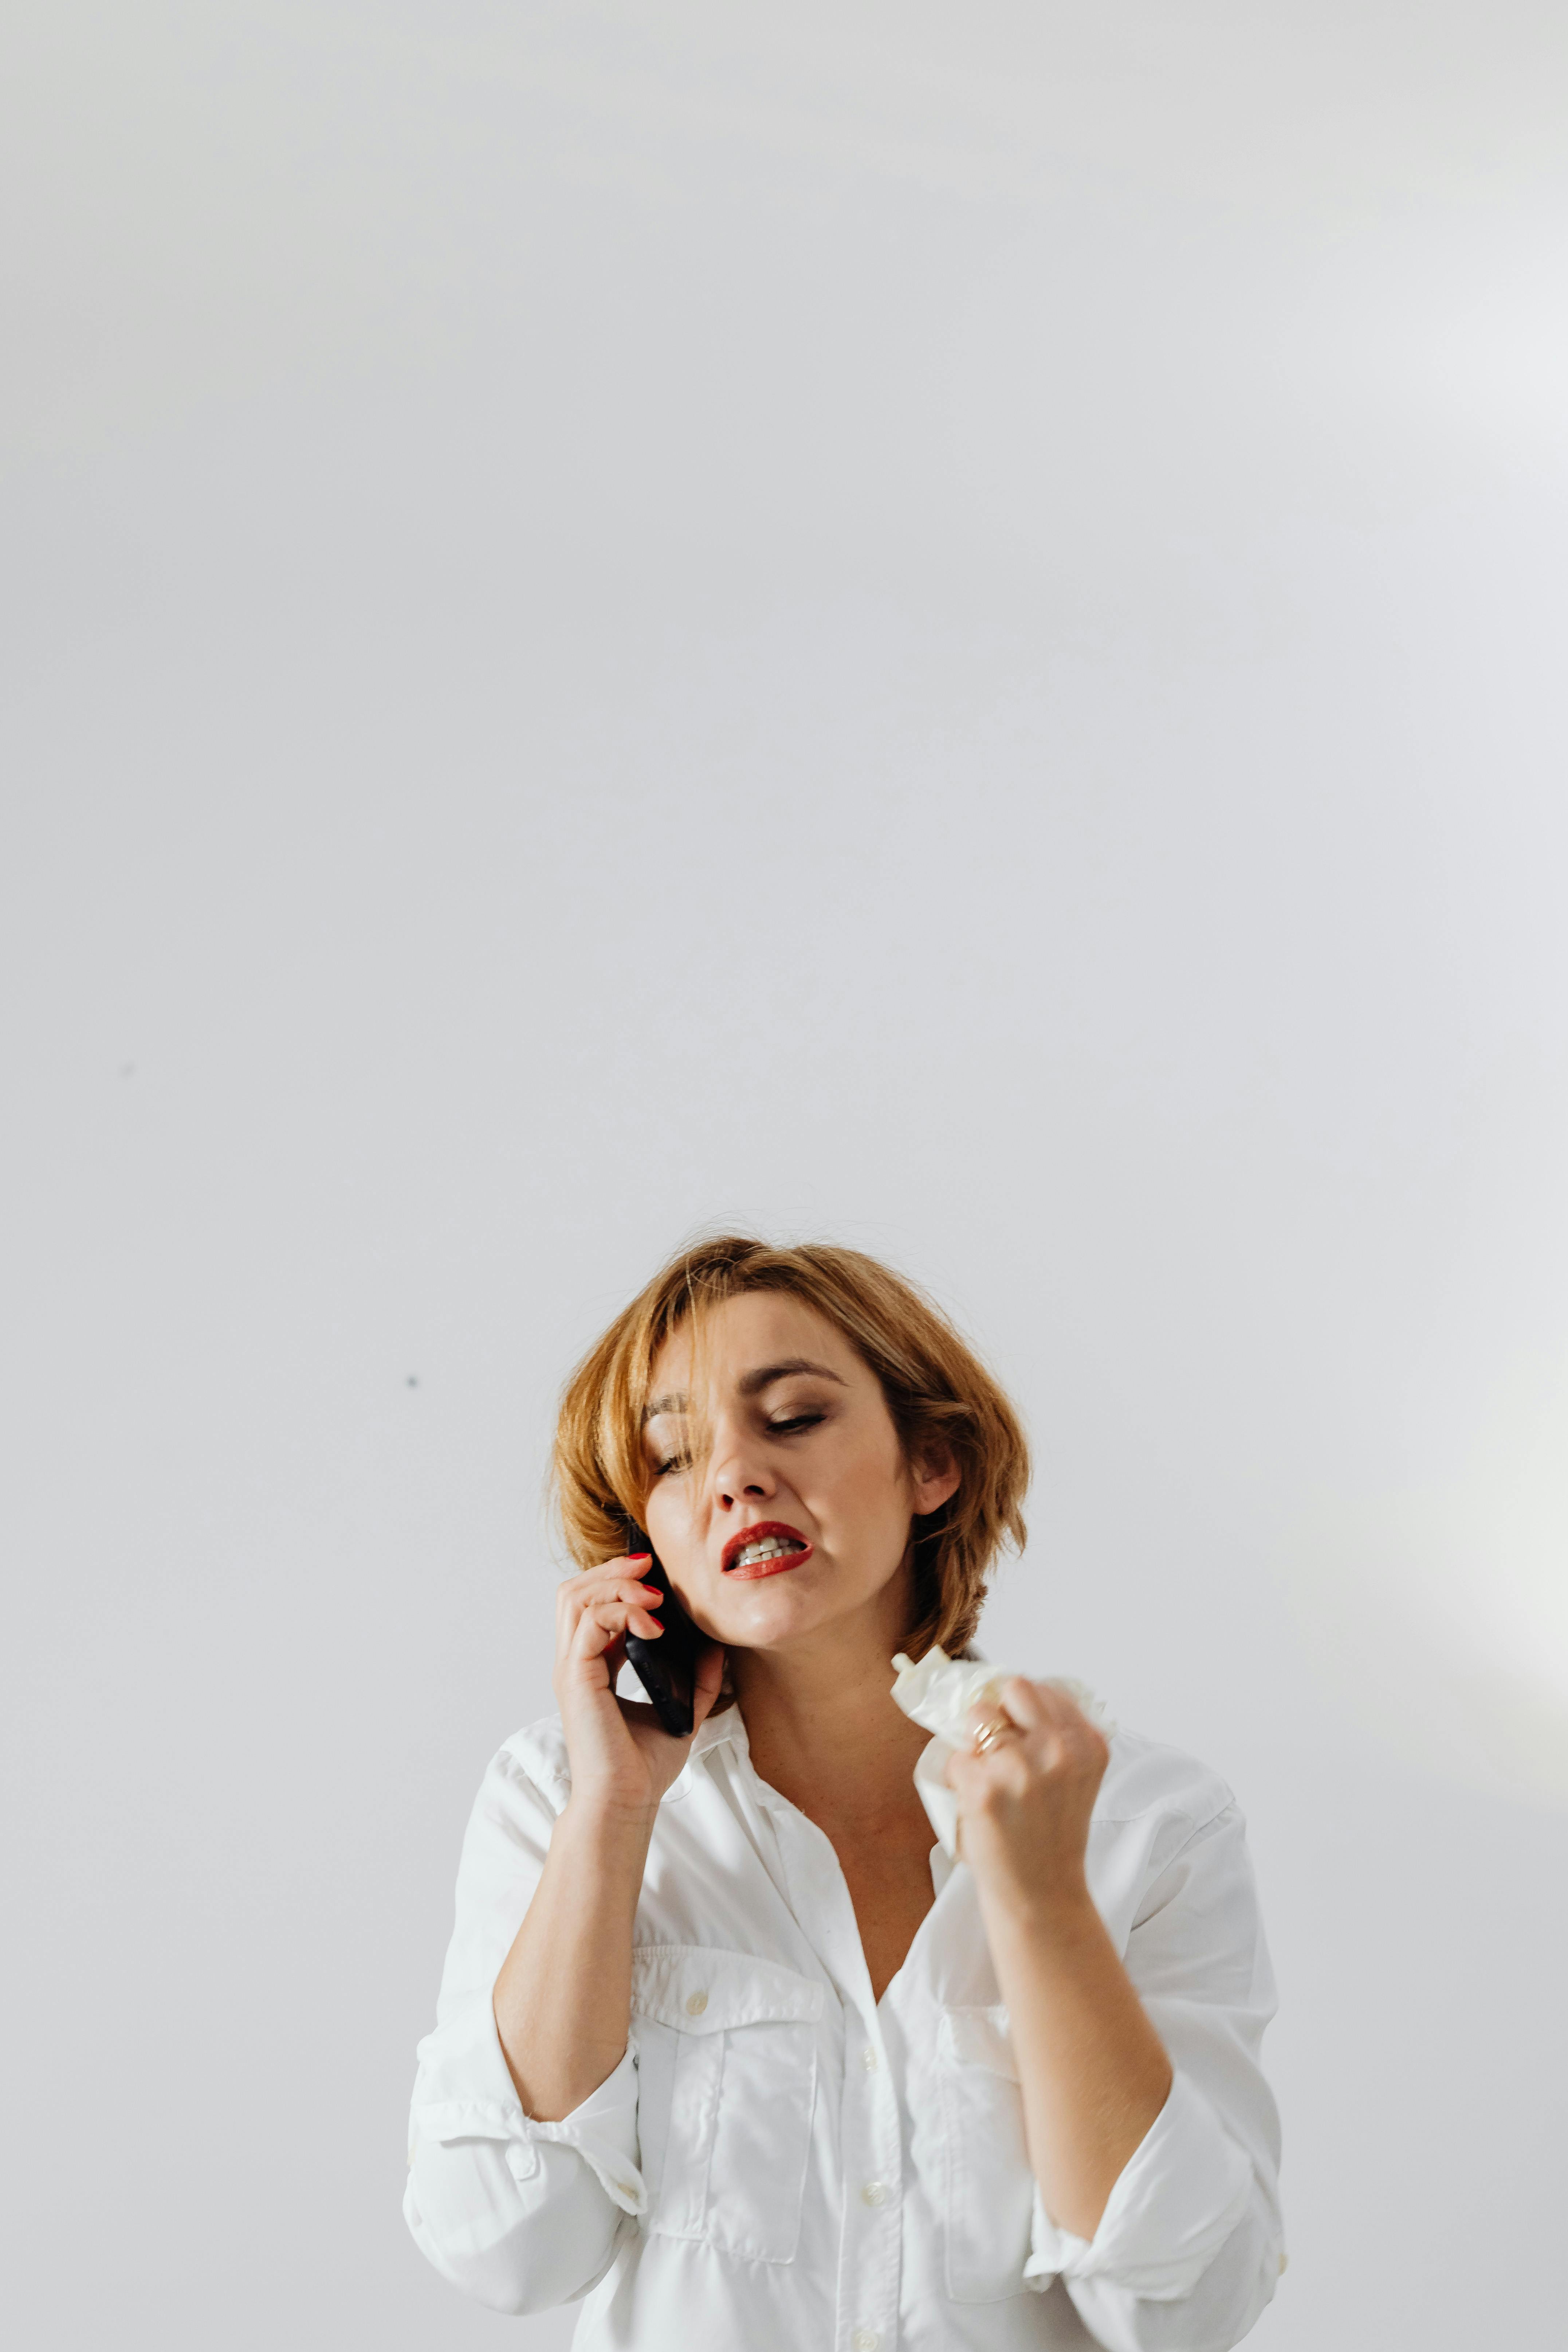 An upset and angry woman holding a tissue while talking on the phone | Source: Pexels